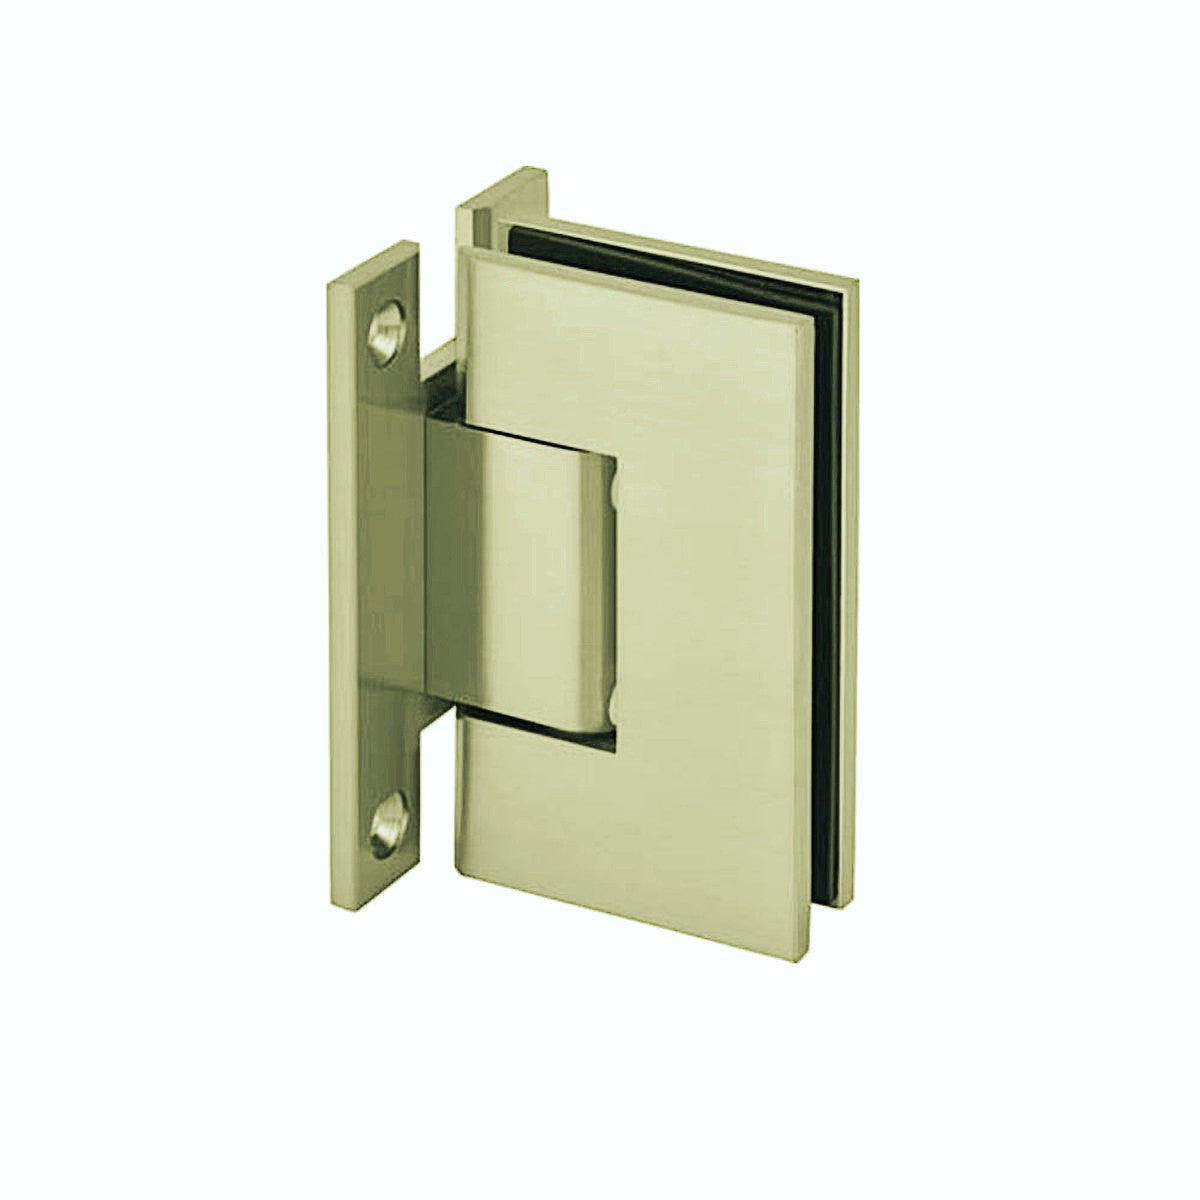 Wall to Glass "H" Back Plate Hinge